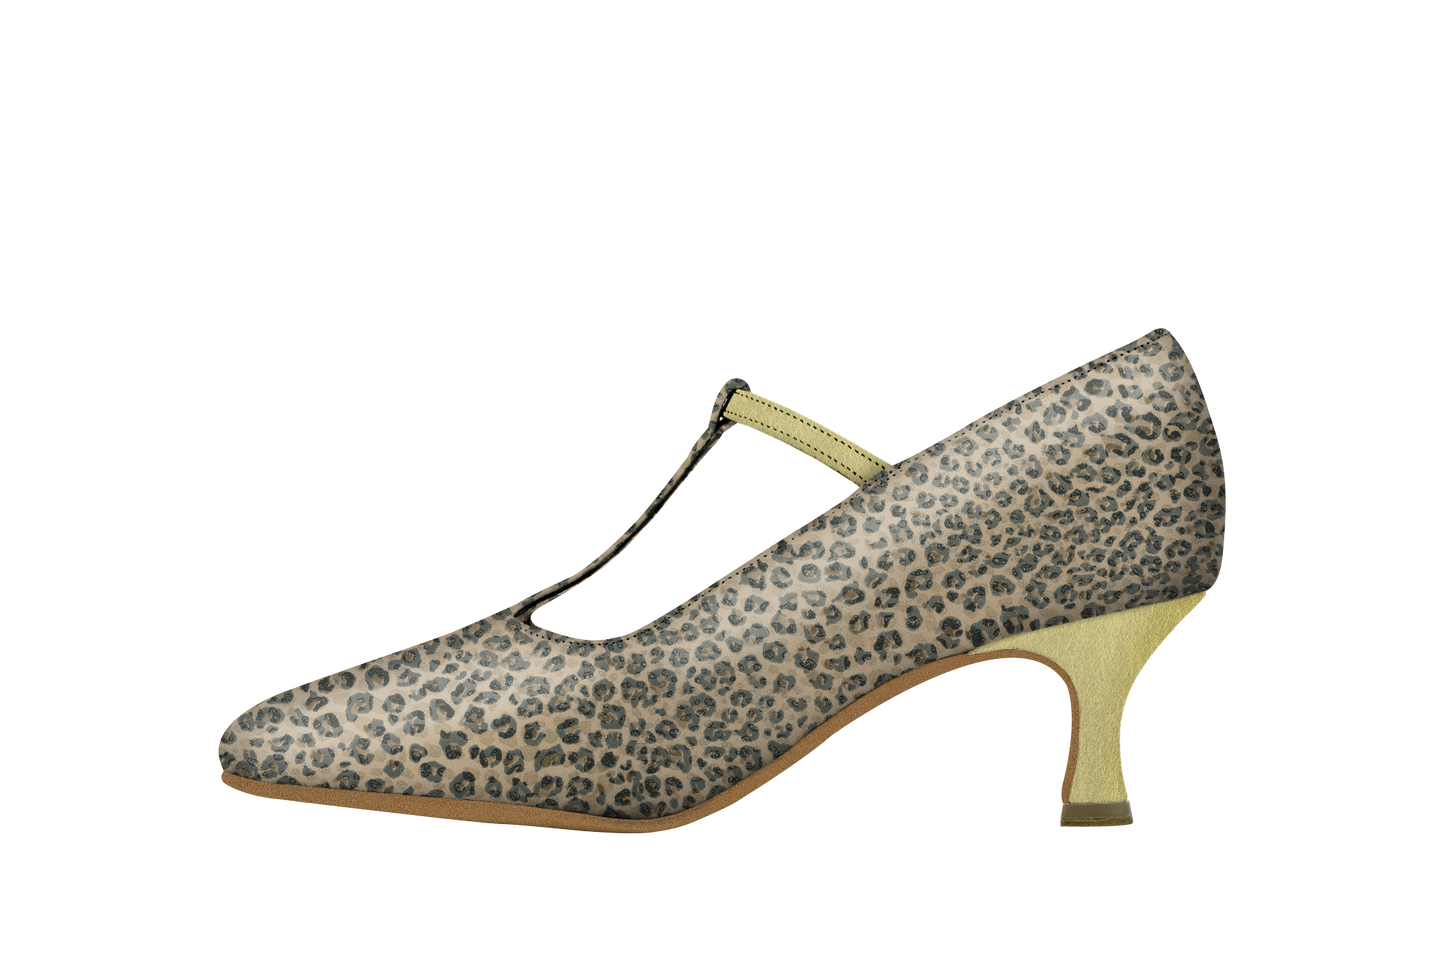 Dance Naturals 733 Mascaretta Leopard Print and Platinum Leather Dance Shoe with T-Bar Strap and Rounded Toe